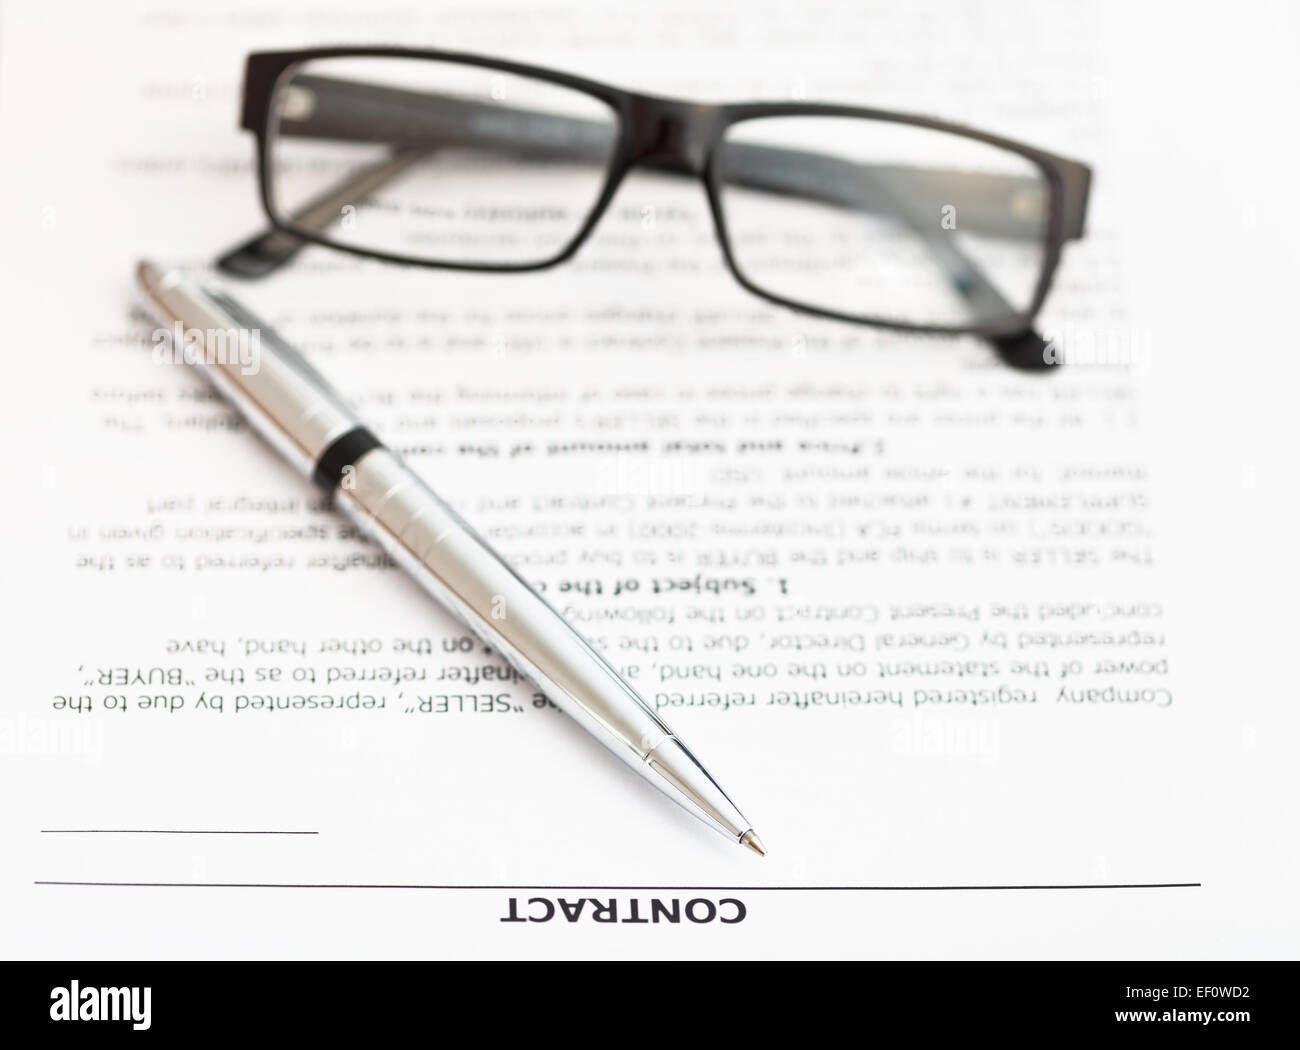 silver pen and eyeglasses on pages of sales contract Stock Photo